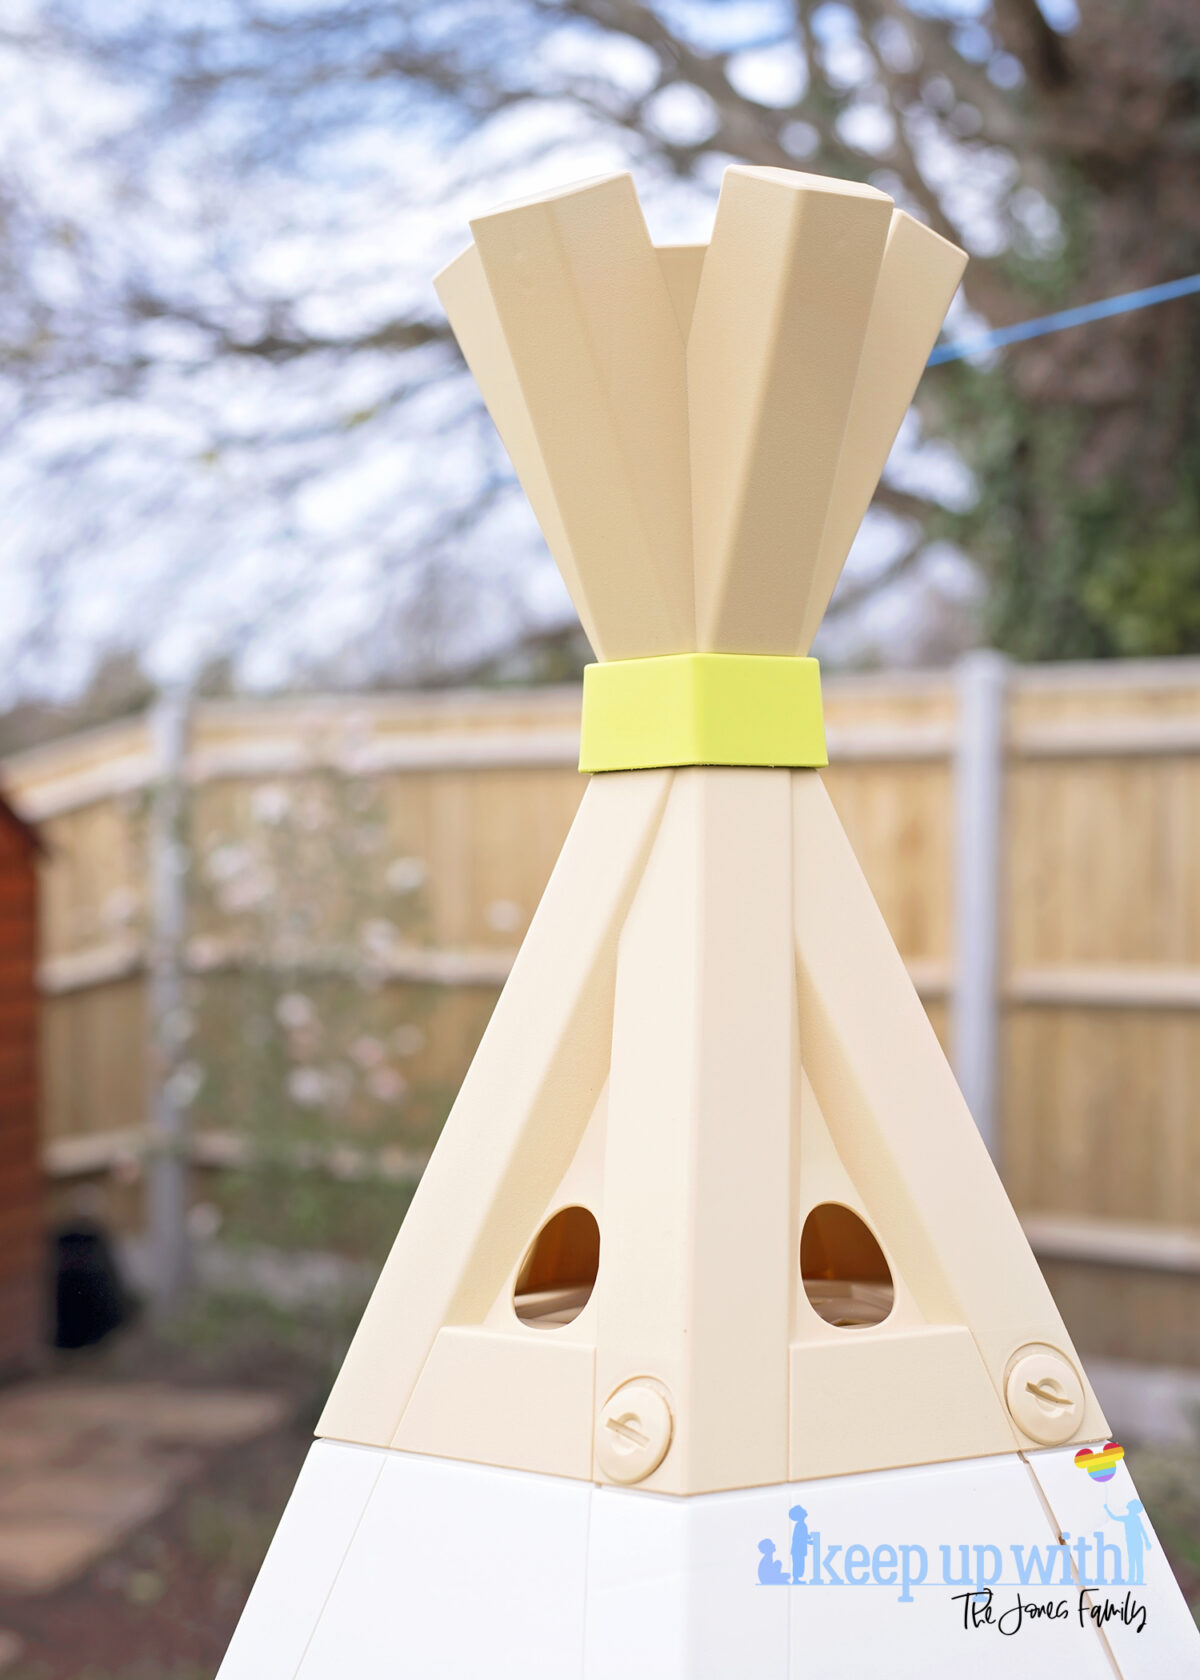 Image shows the new Smoby Teepee, available on Amazon, in the garden. The teepee is cream, white and green and the image shows the plastic teepee recreating the top part of a teepee where the wooden poles are crossed.